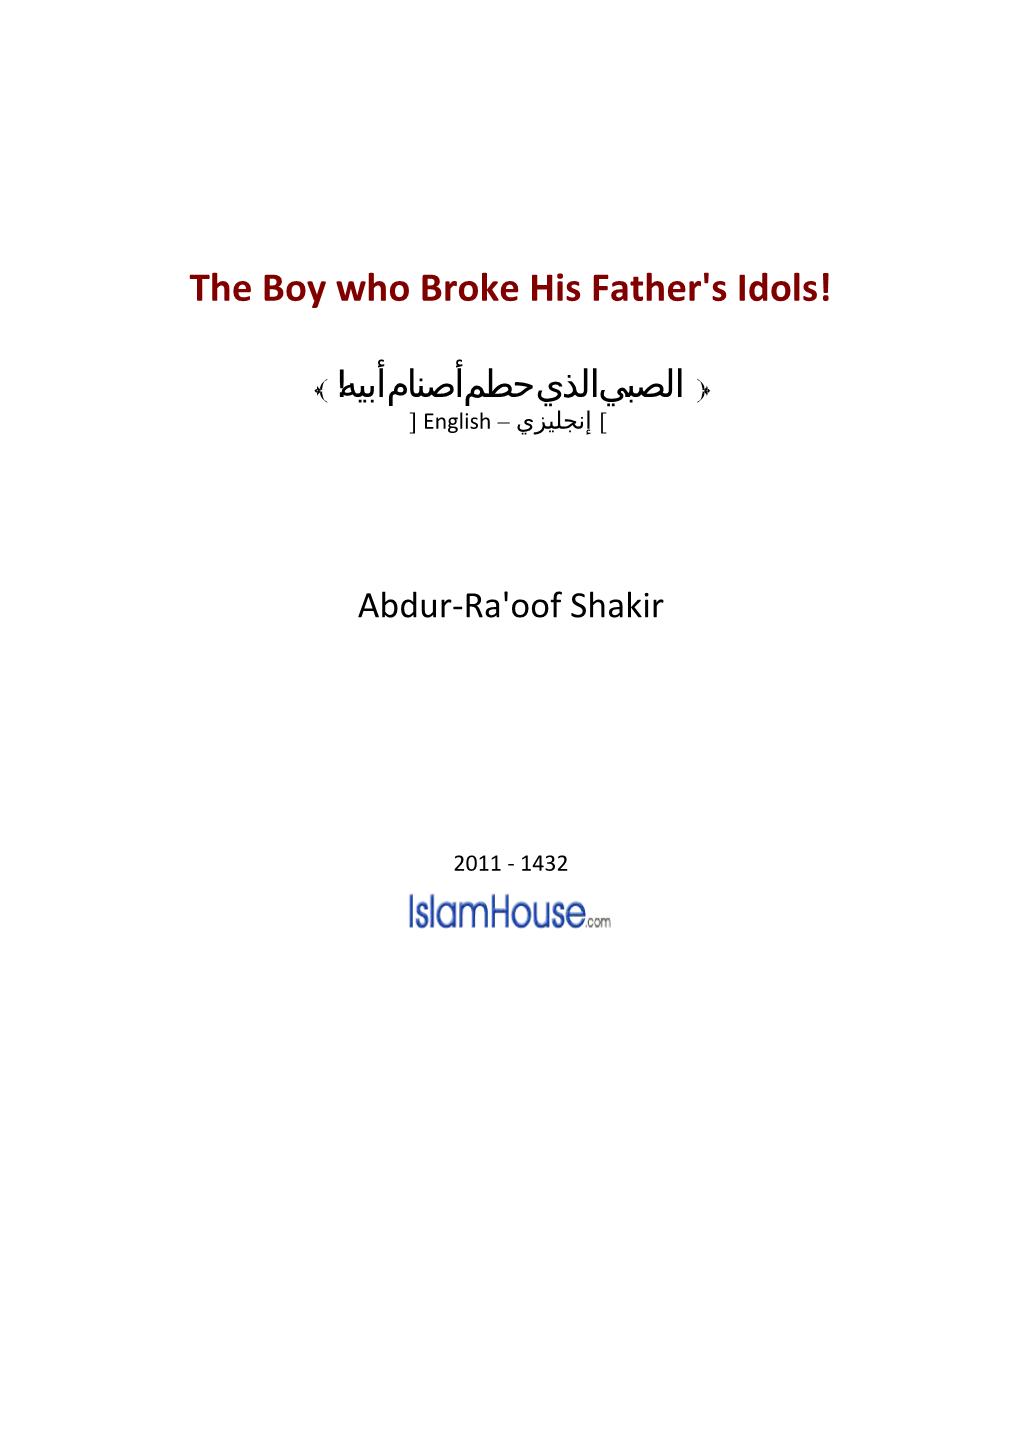 The Boy Who Broke His Father's Idols!